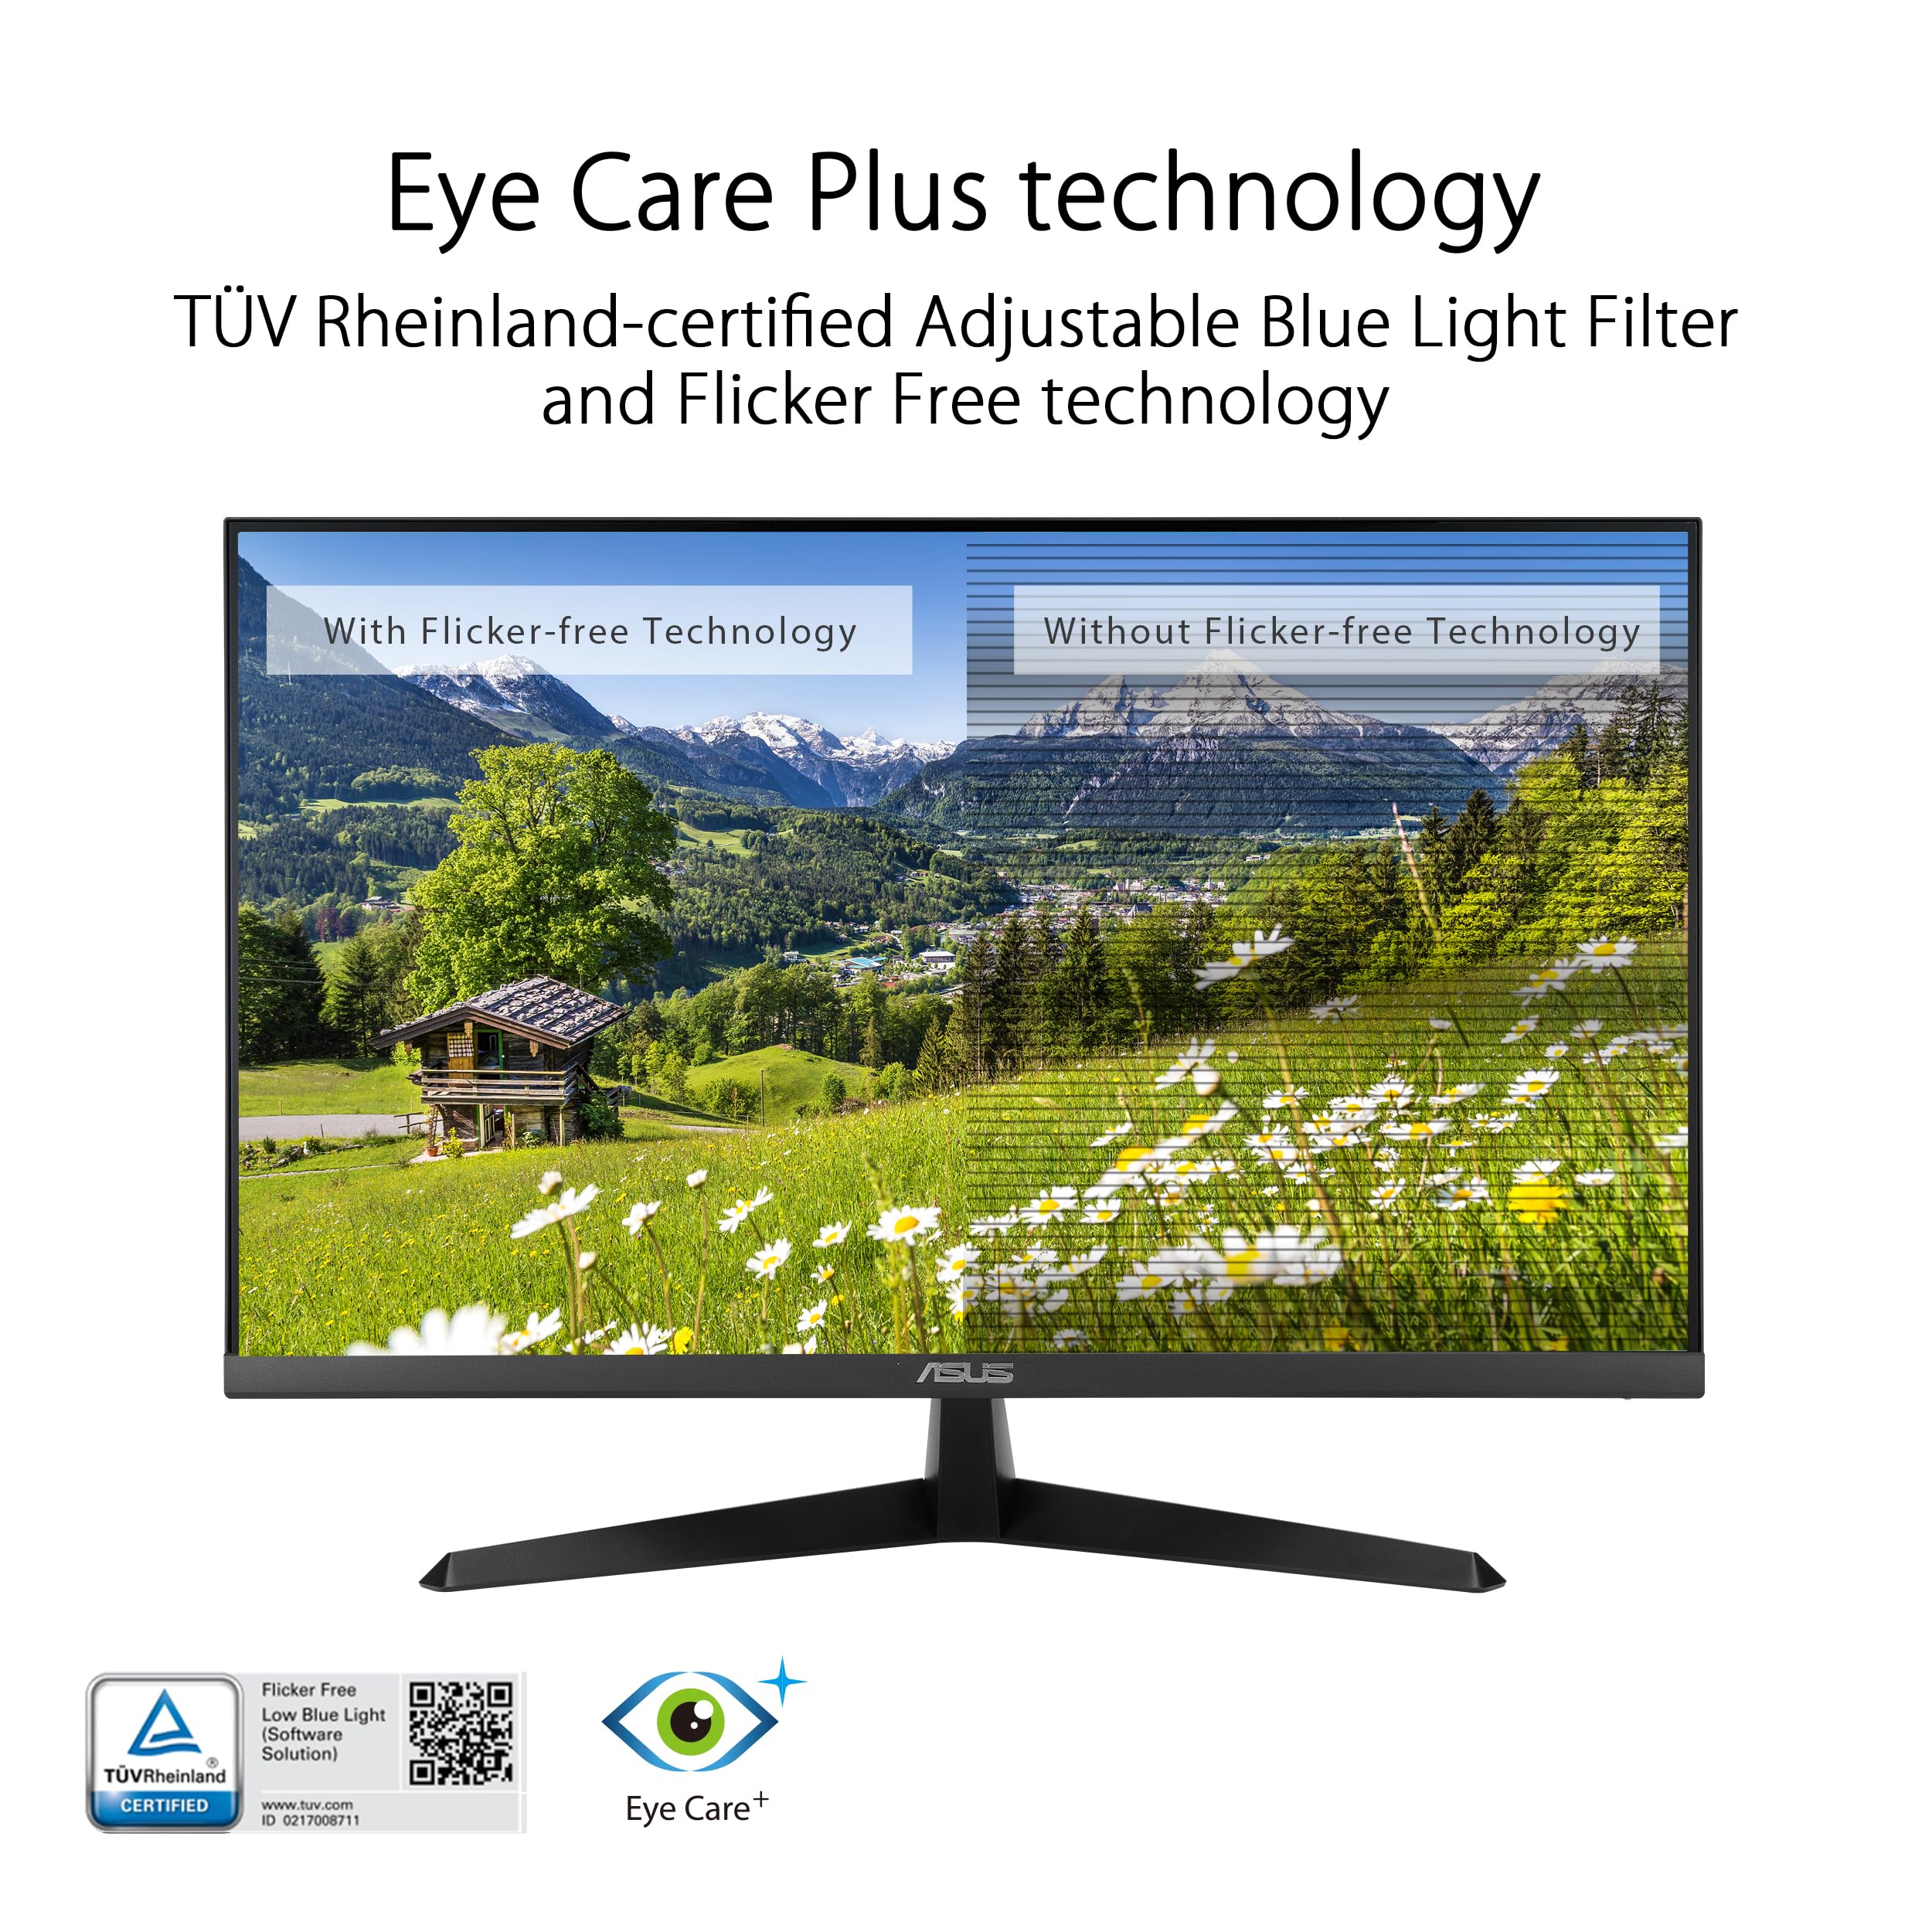 ASUS 27” 1080P Eye Care Monitor (VY279HF) – Full HD, IPS, 100Hz, SmoothMotion, 1ms, Adaptive Sync, for Working and Gaming, Blue Light Filter, Flicker Free, HDMI, VESA Mountable, 3 Year Warranty